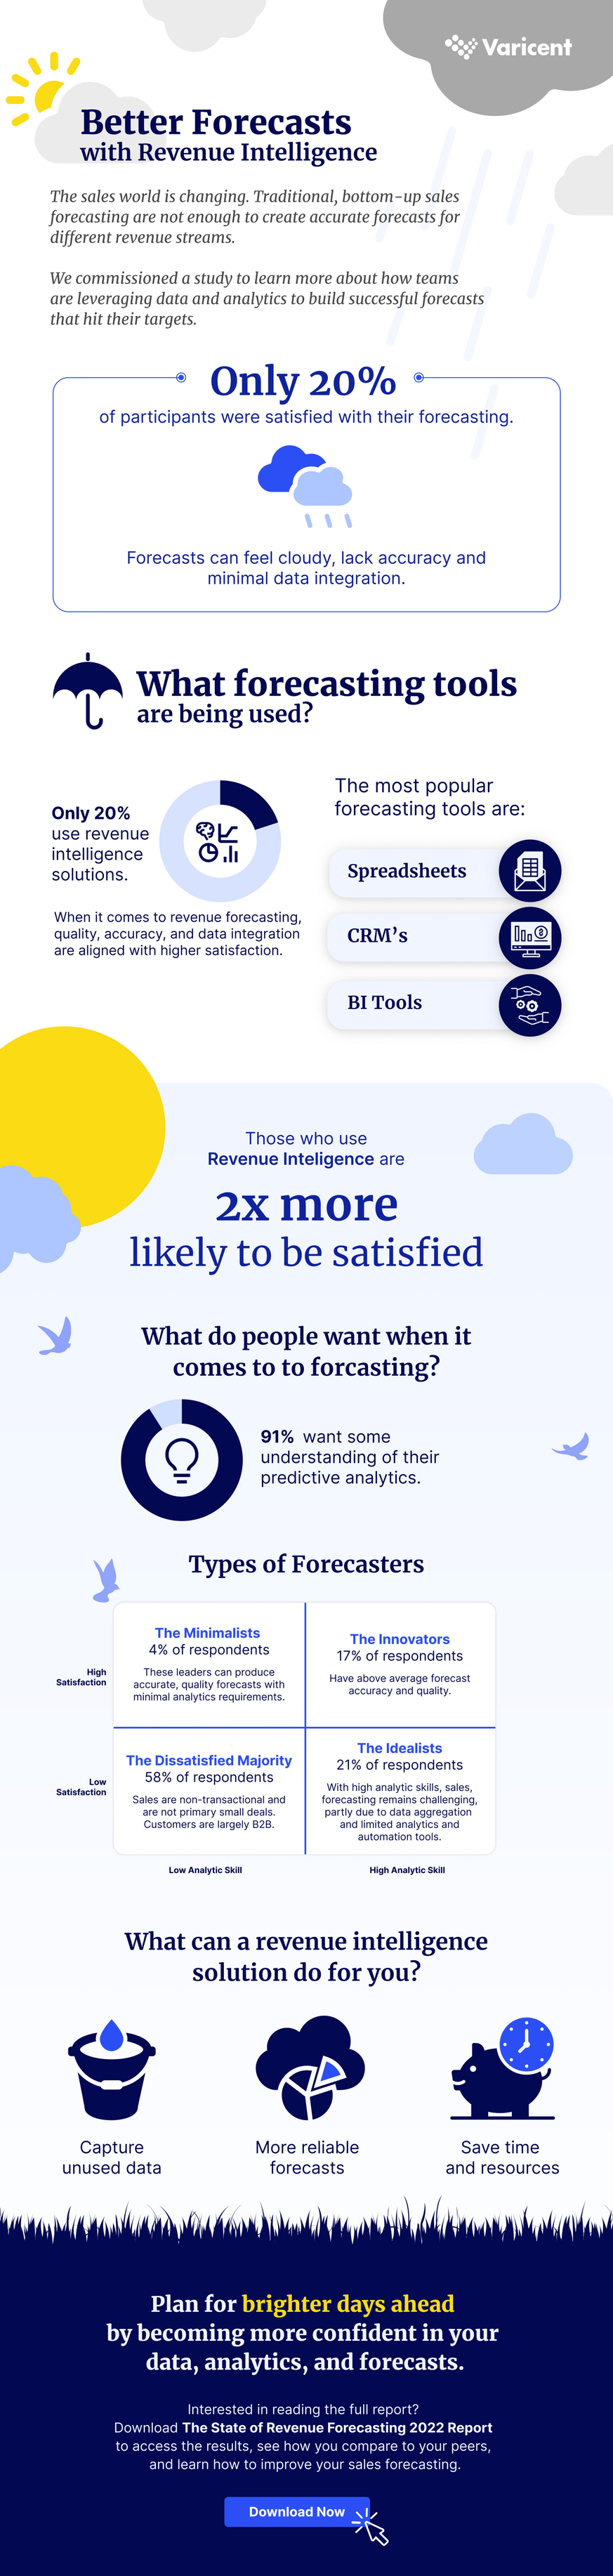 Better-Forecasts-with-Revenue-Intelligence